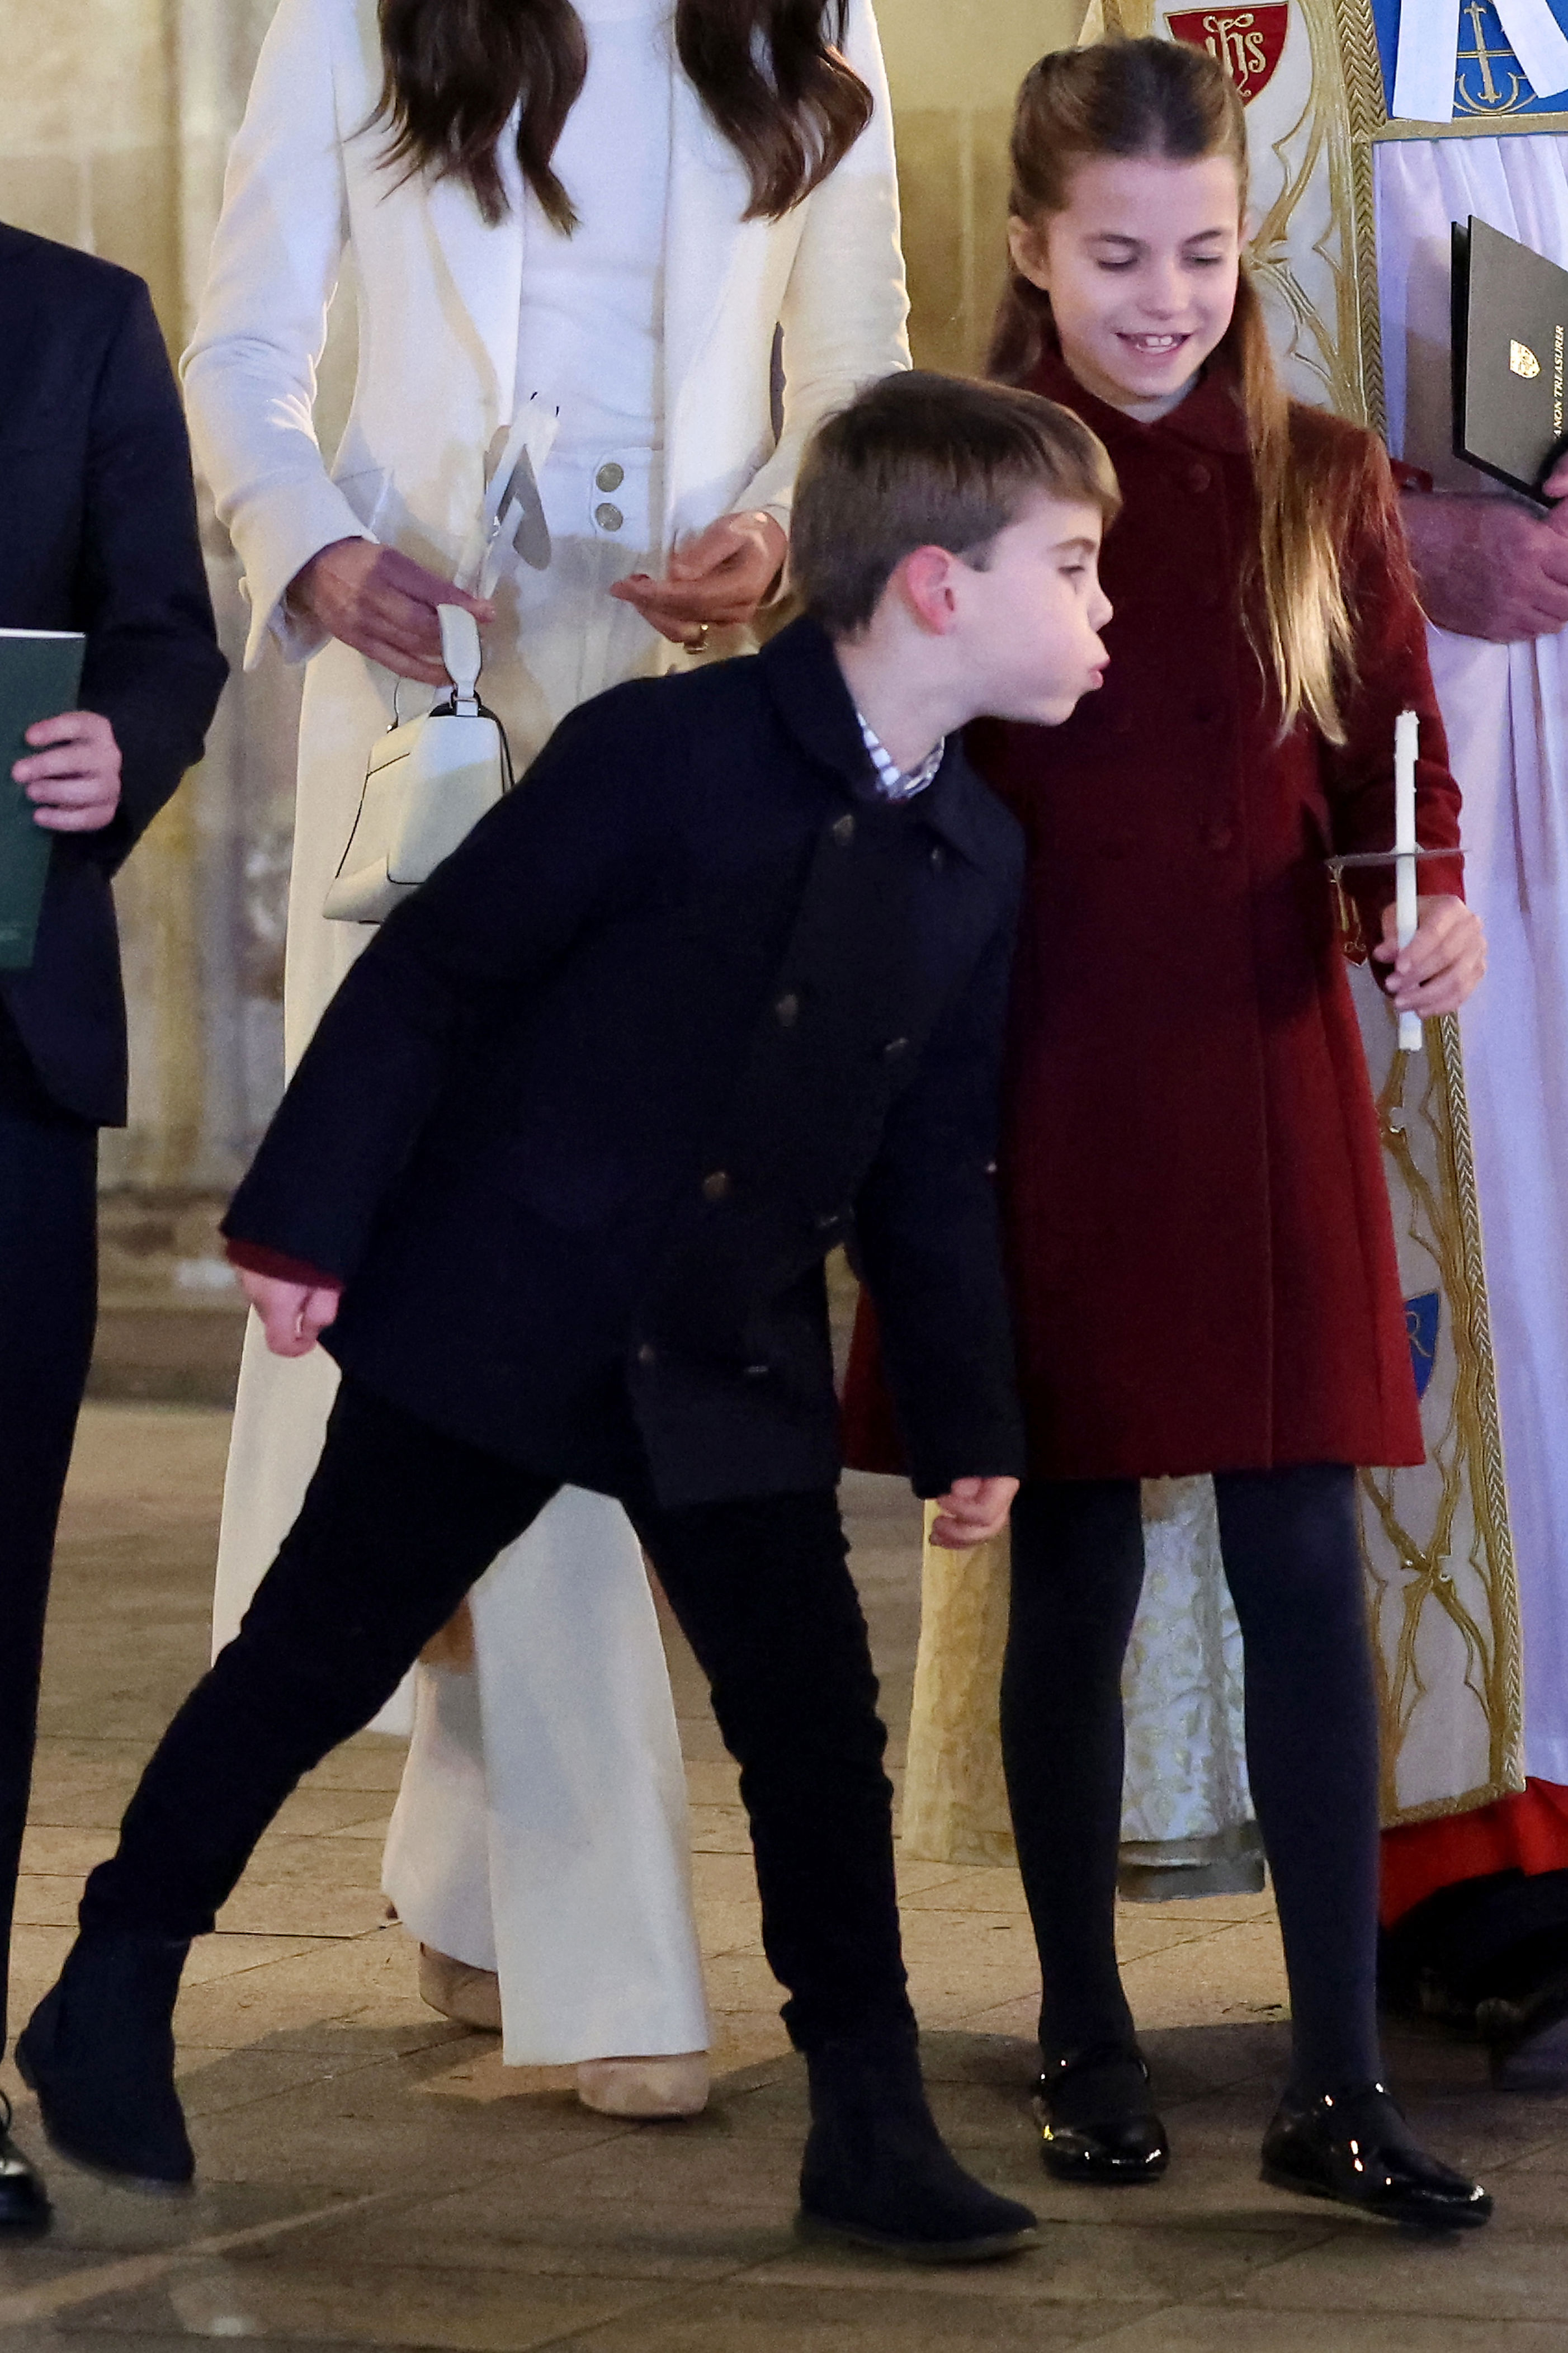 <p><span>Notorious royal rascal Prince Louis playfully blew out big sister Princess Charlotte's candle at the </span><a href="https://www.wonderwall.com/celebrity/photos/see-the-best-pictures-from-the-royal-christmas-carol-service-2023-819436.gallery">Together At Christmas carol service</a><span> -- which is spearheaded by the Princess of Wales and supported by The Royal Foundation -- at Westminster Abbey in London on Dec. 8, 2023. </span></p><p>Keep reading to see the Wales trio when all their candles were aflame...</p><p>MORE: <a href="https://www.wonderwall.com/celebrity/photos/see-the-best-pictures-from-the-royal-christmas-carol-service-2023-819436.gallery">See the best photos of the royal family at the 2023 Christmas carol service</a></p>